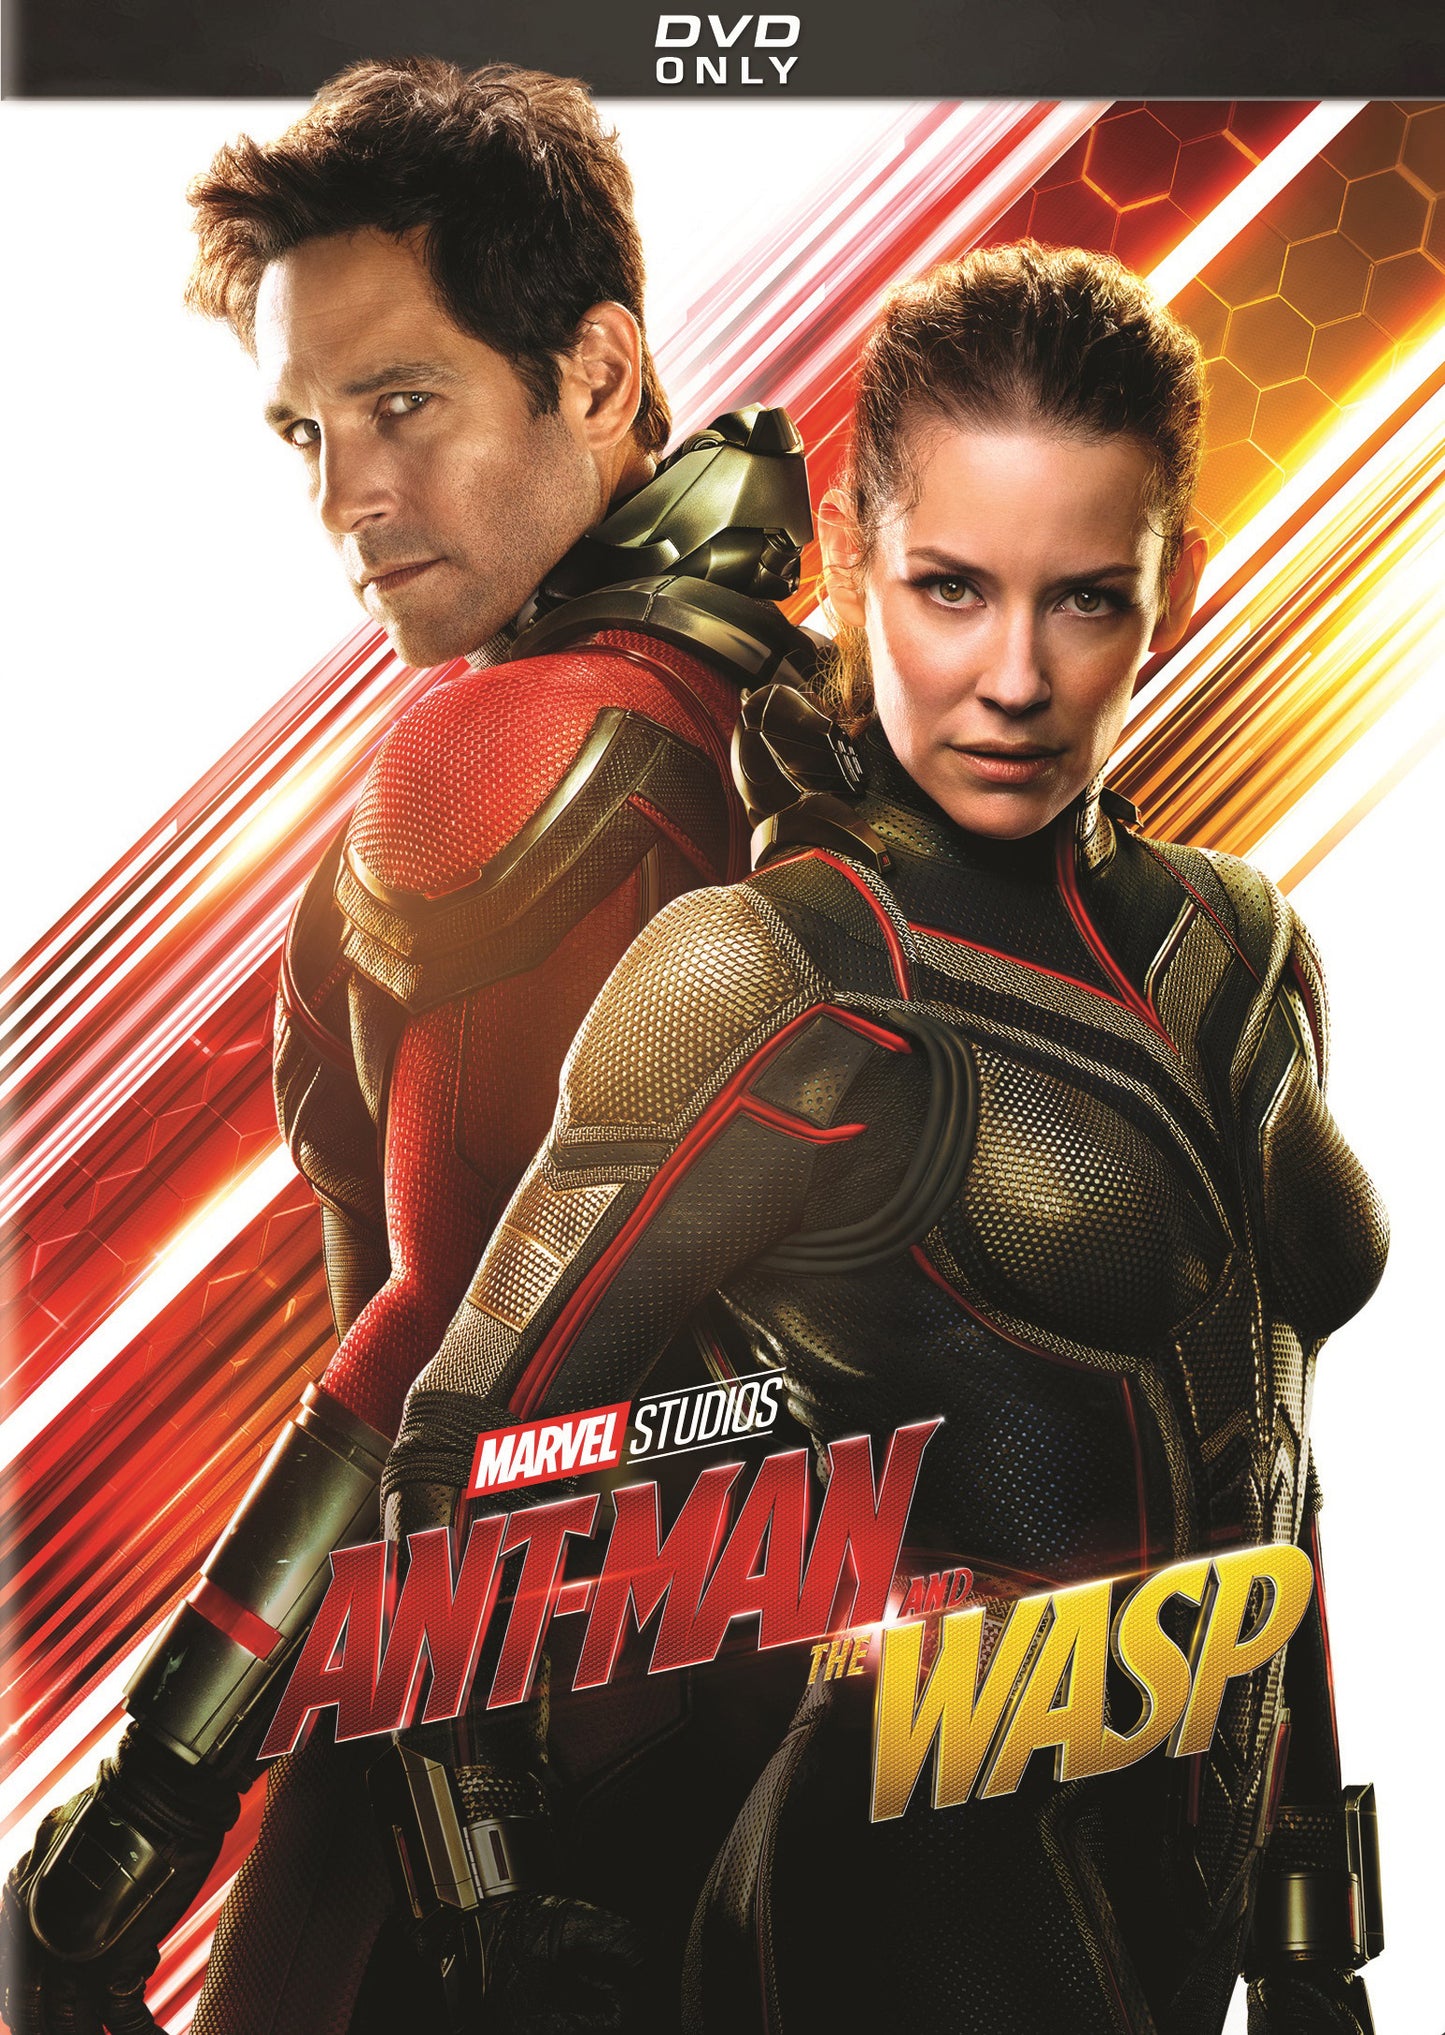 Ant-Man and the Wasp cover art